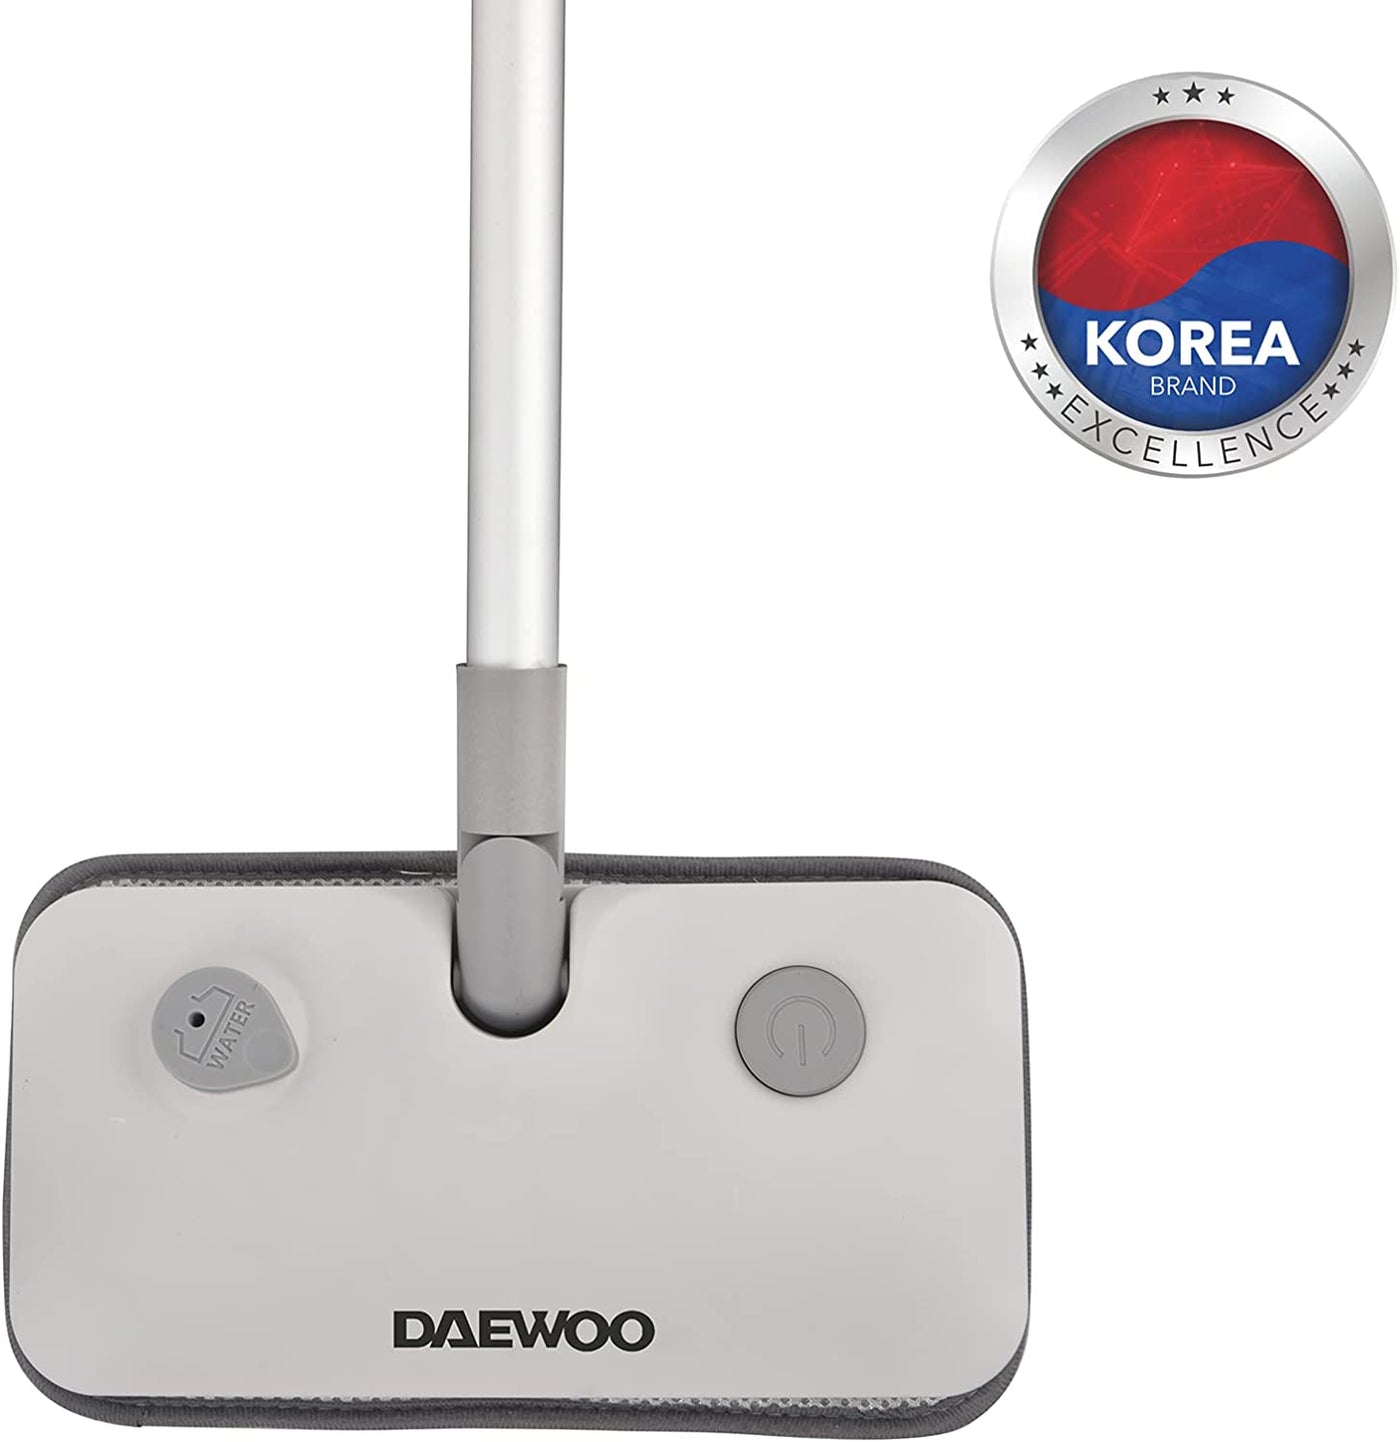 Multifunction Steam Mop with High Steam, Microfiber Pad 1000W